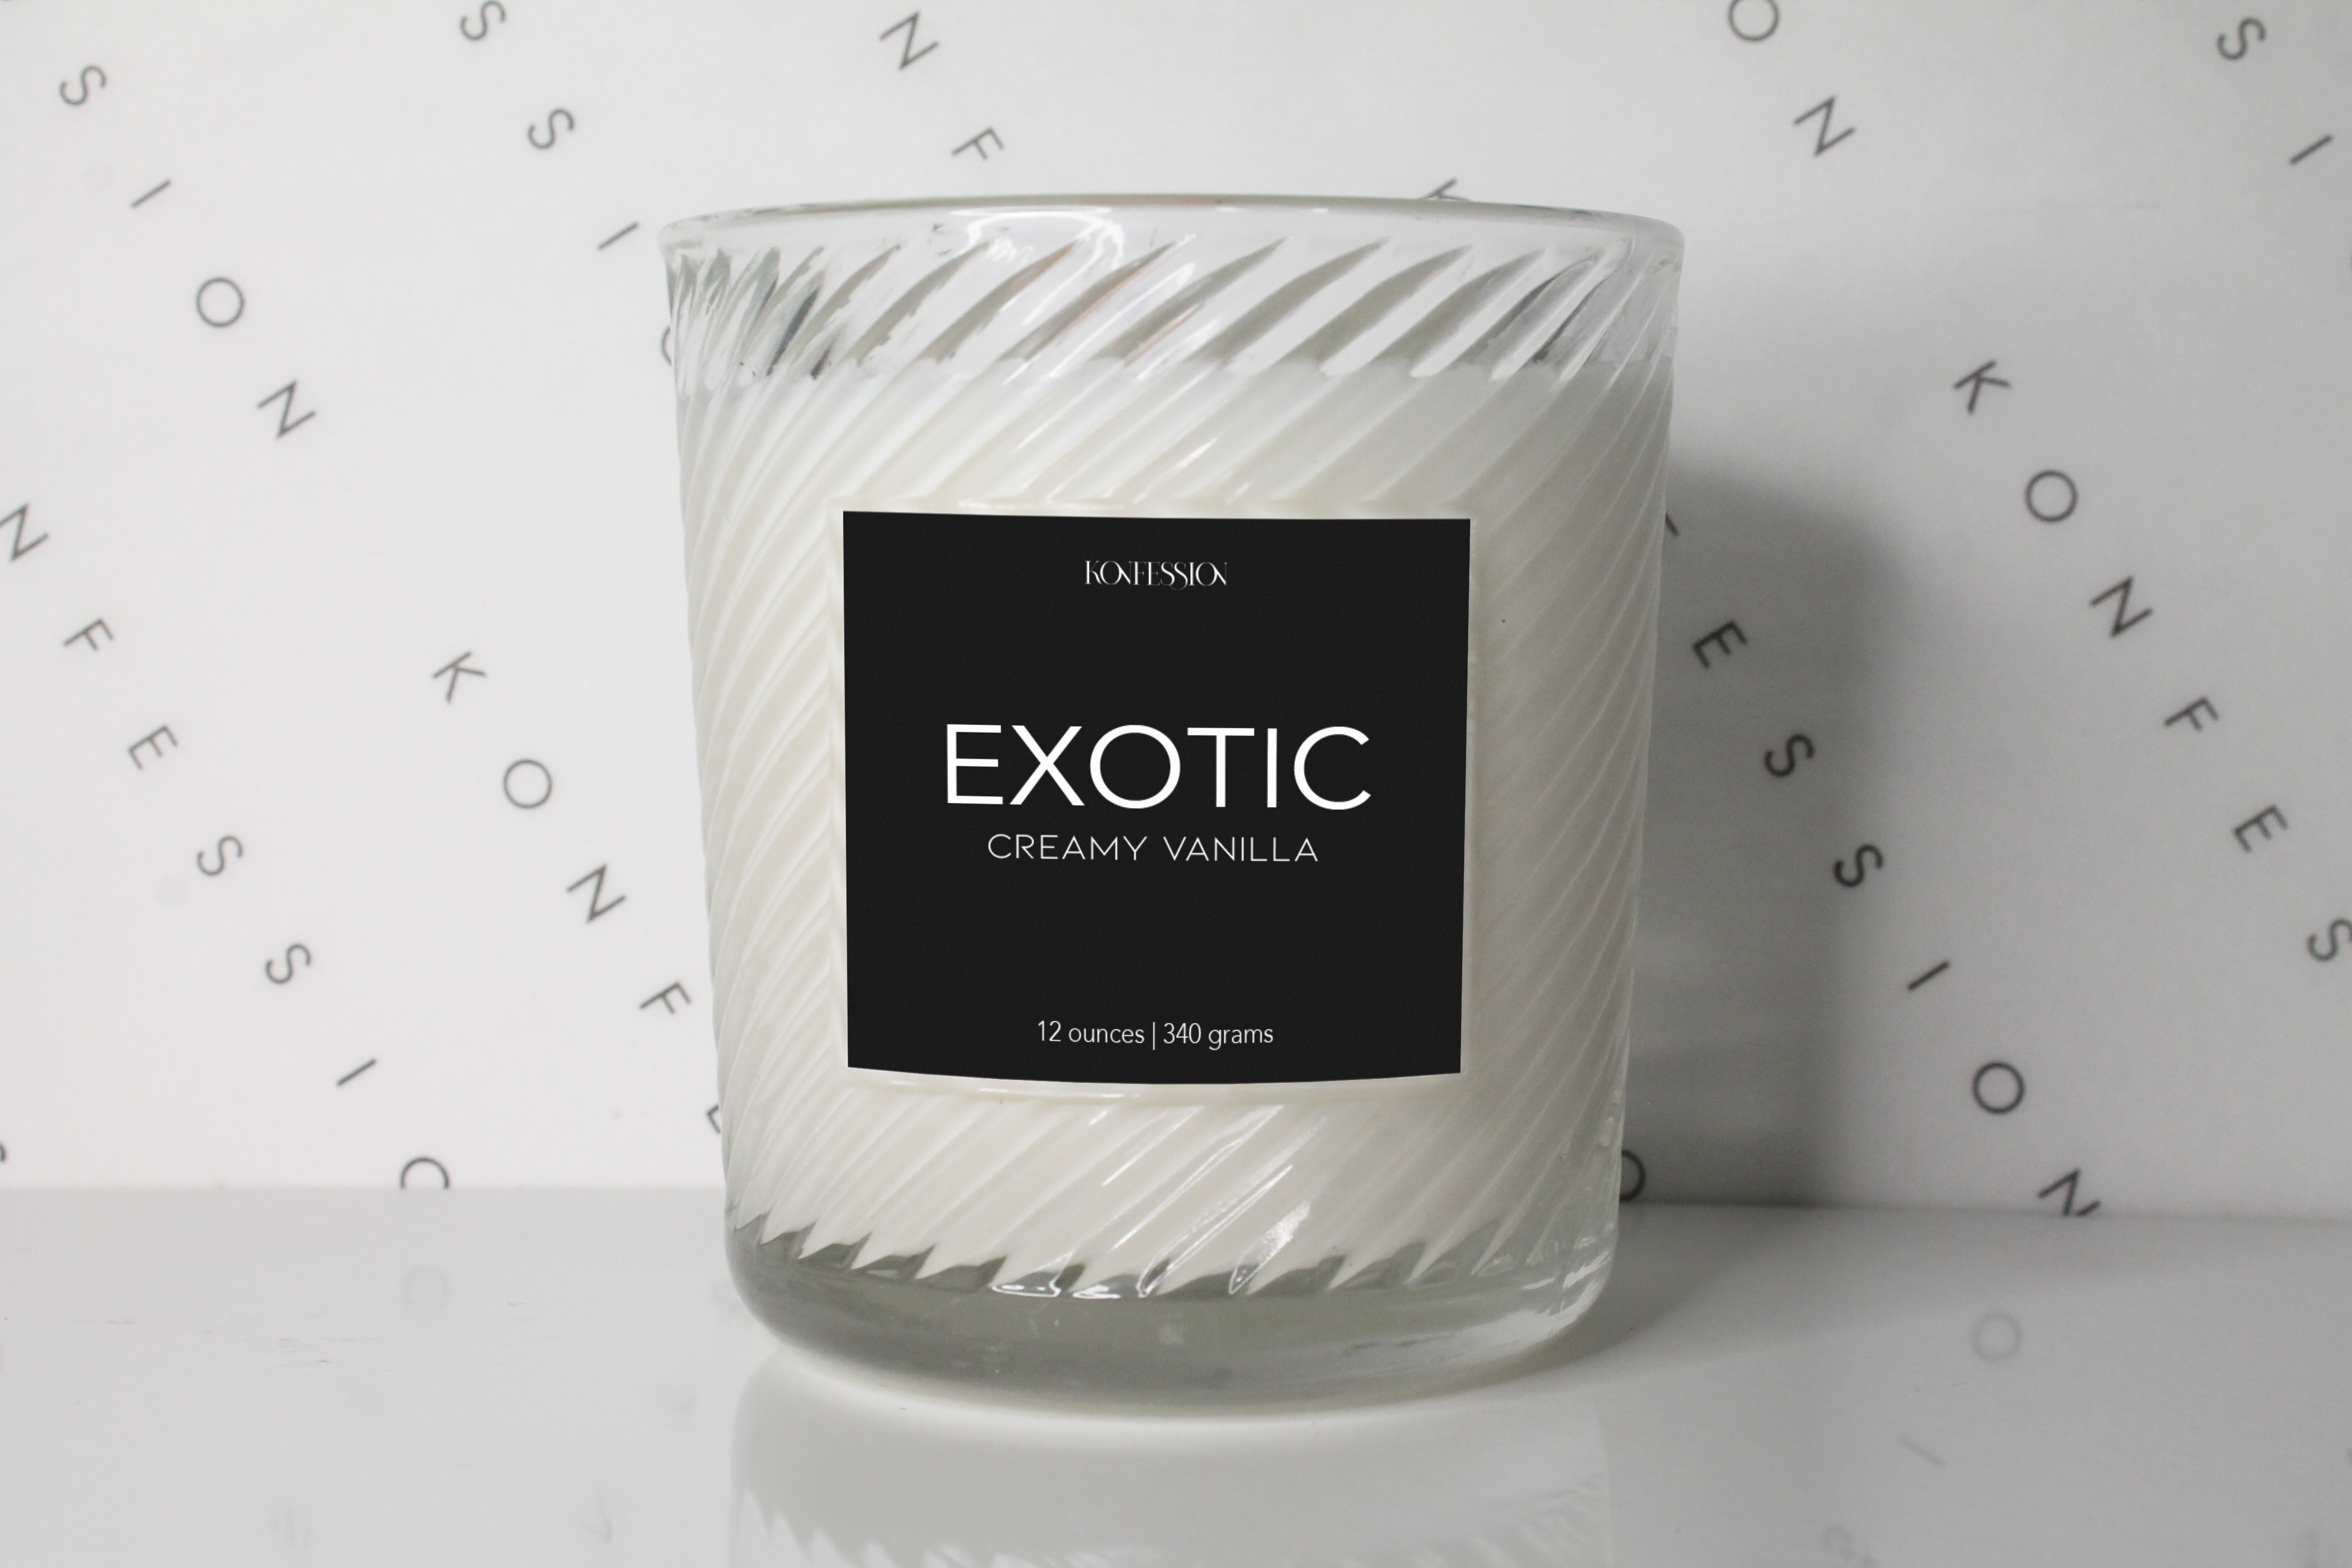 Konfession candle named Exotic in the scent of creamy vanilla.